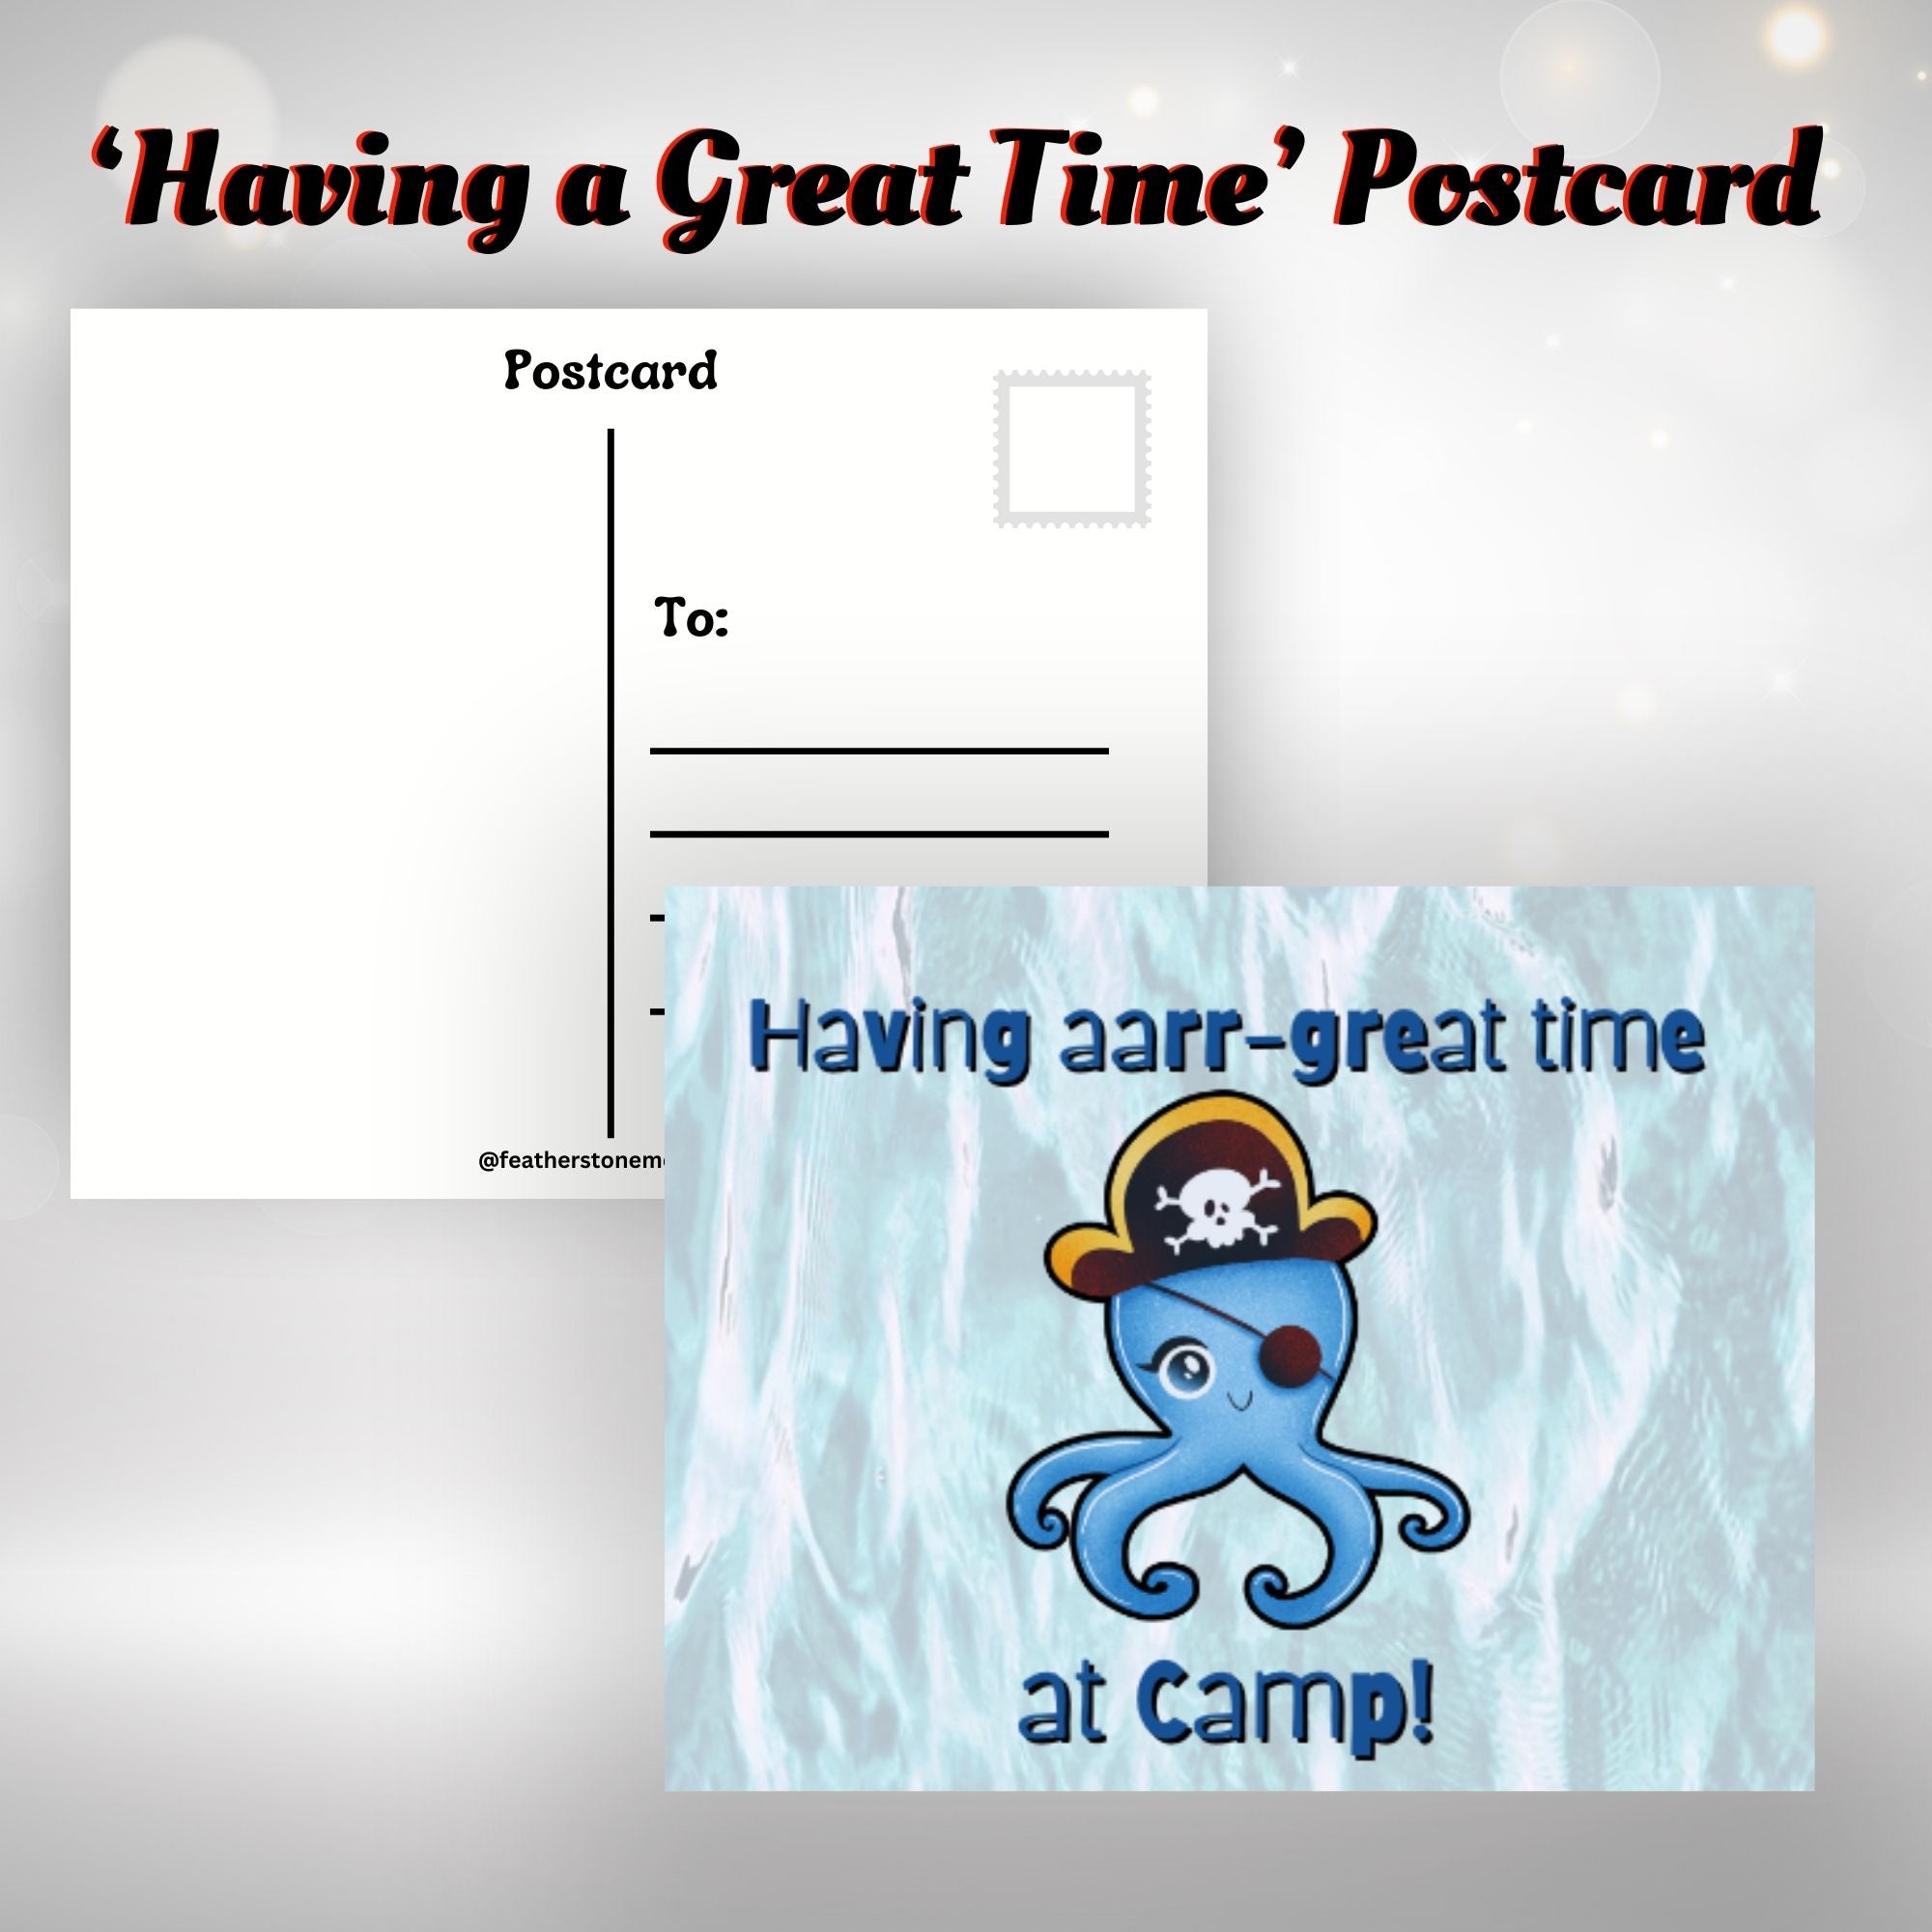 This image shows the Having aarr-great time at camp postcard with a pirate octopus.